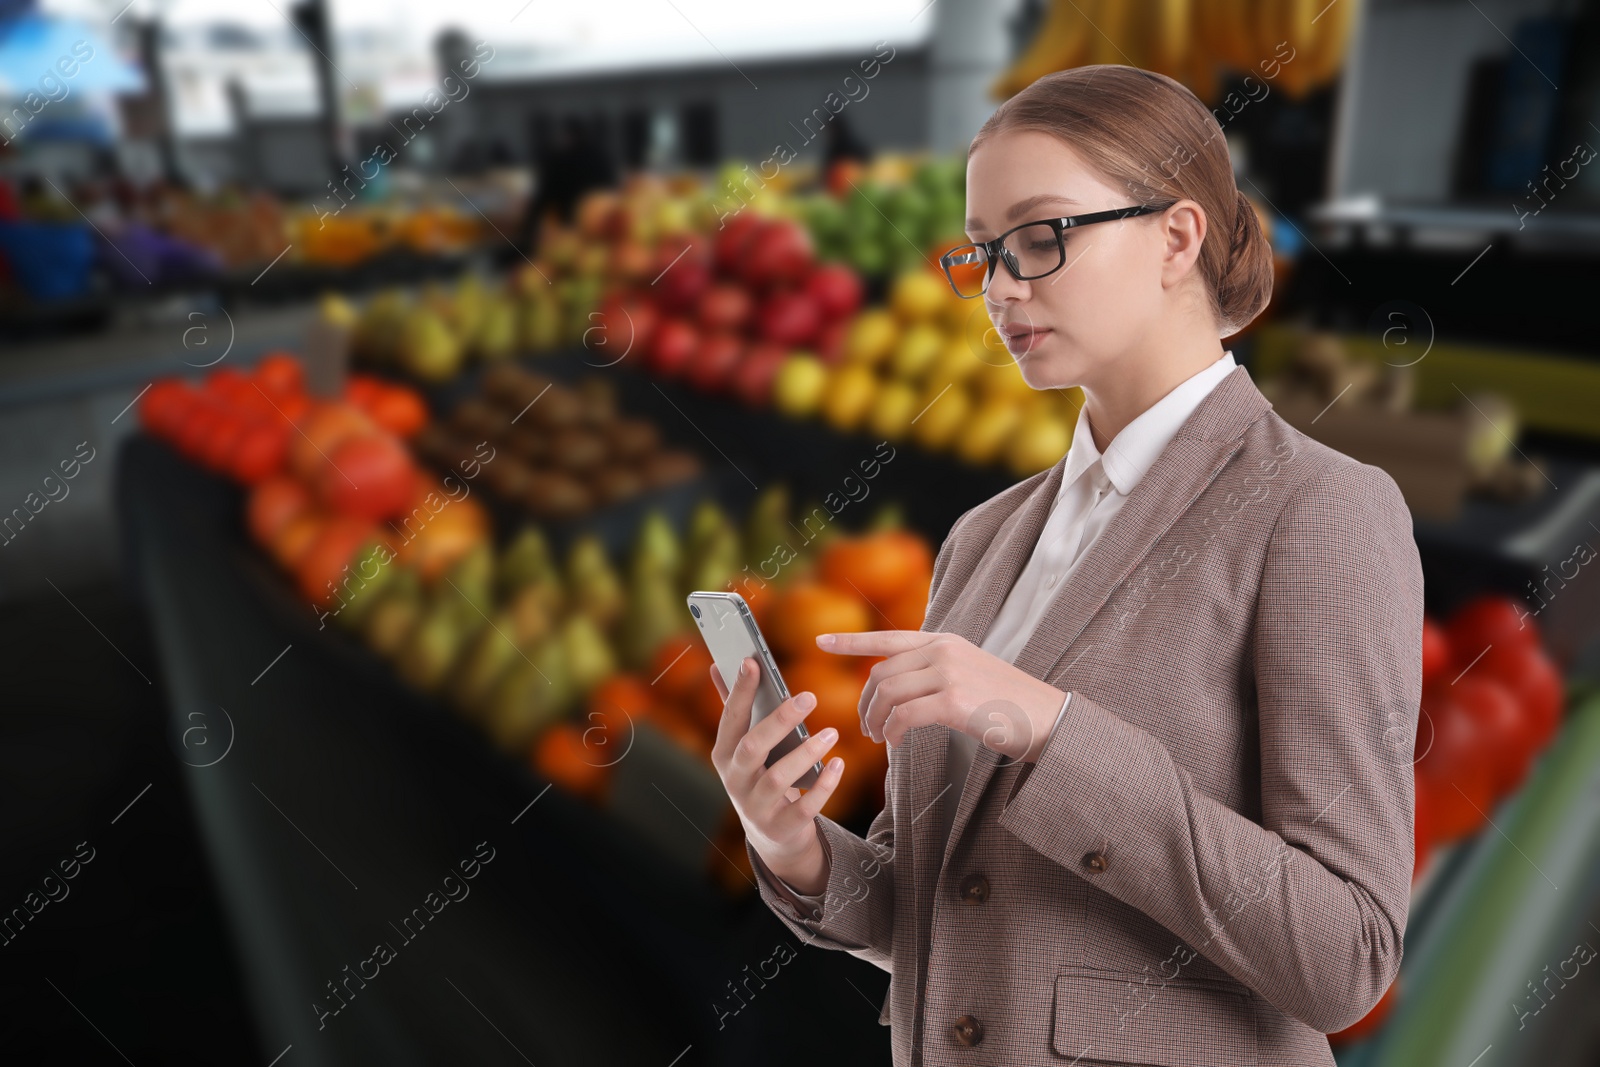 Image of Wholesale and logistics concept. Manager using phone at market